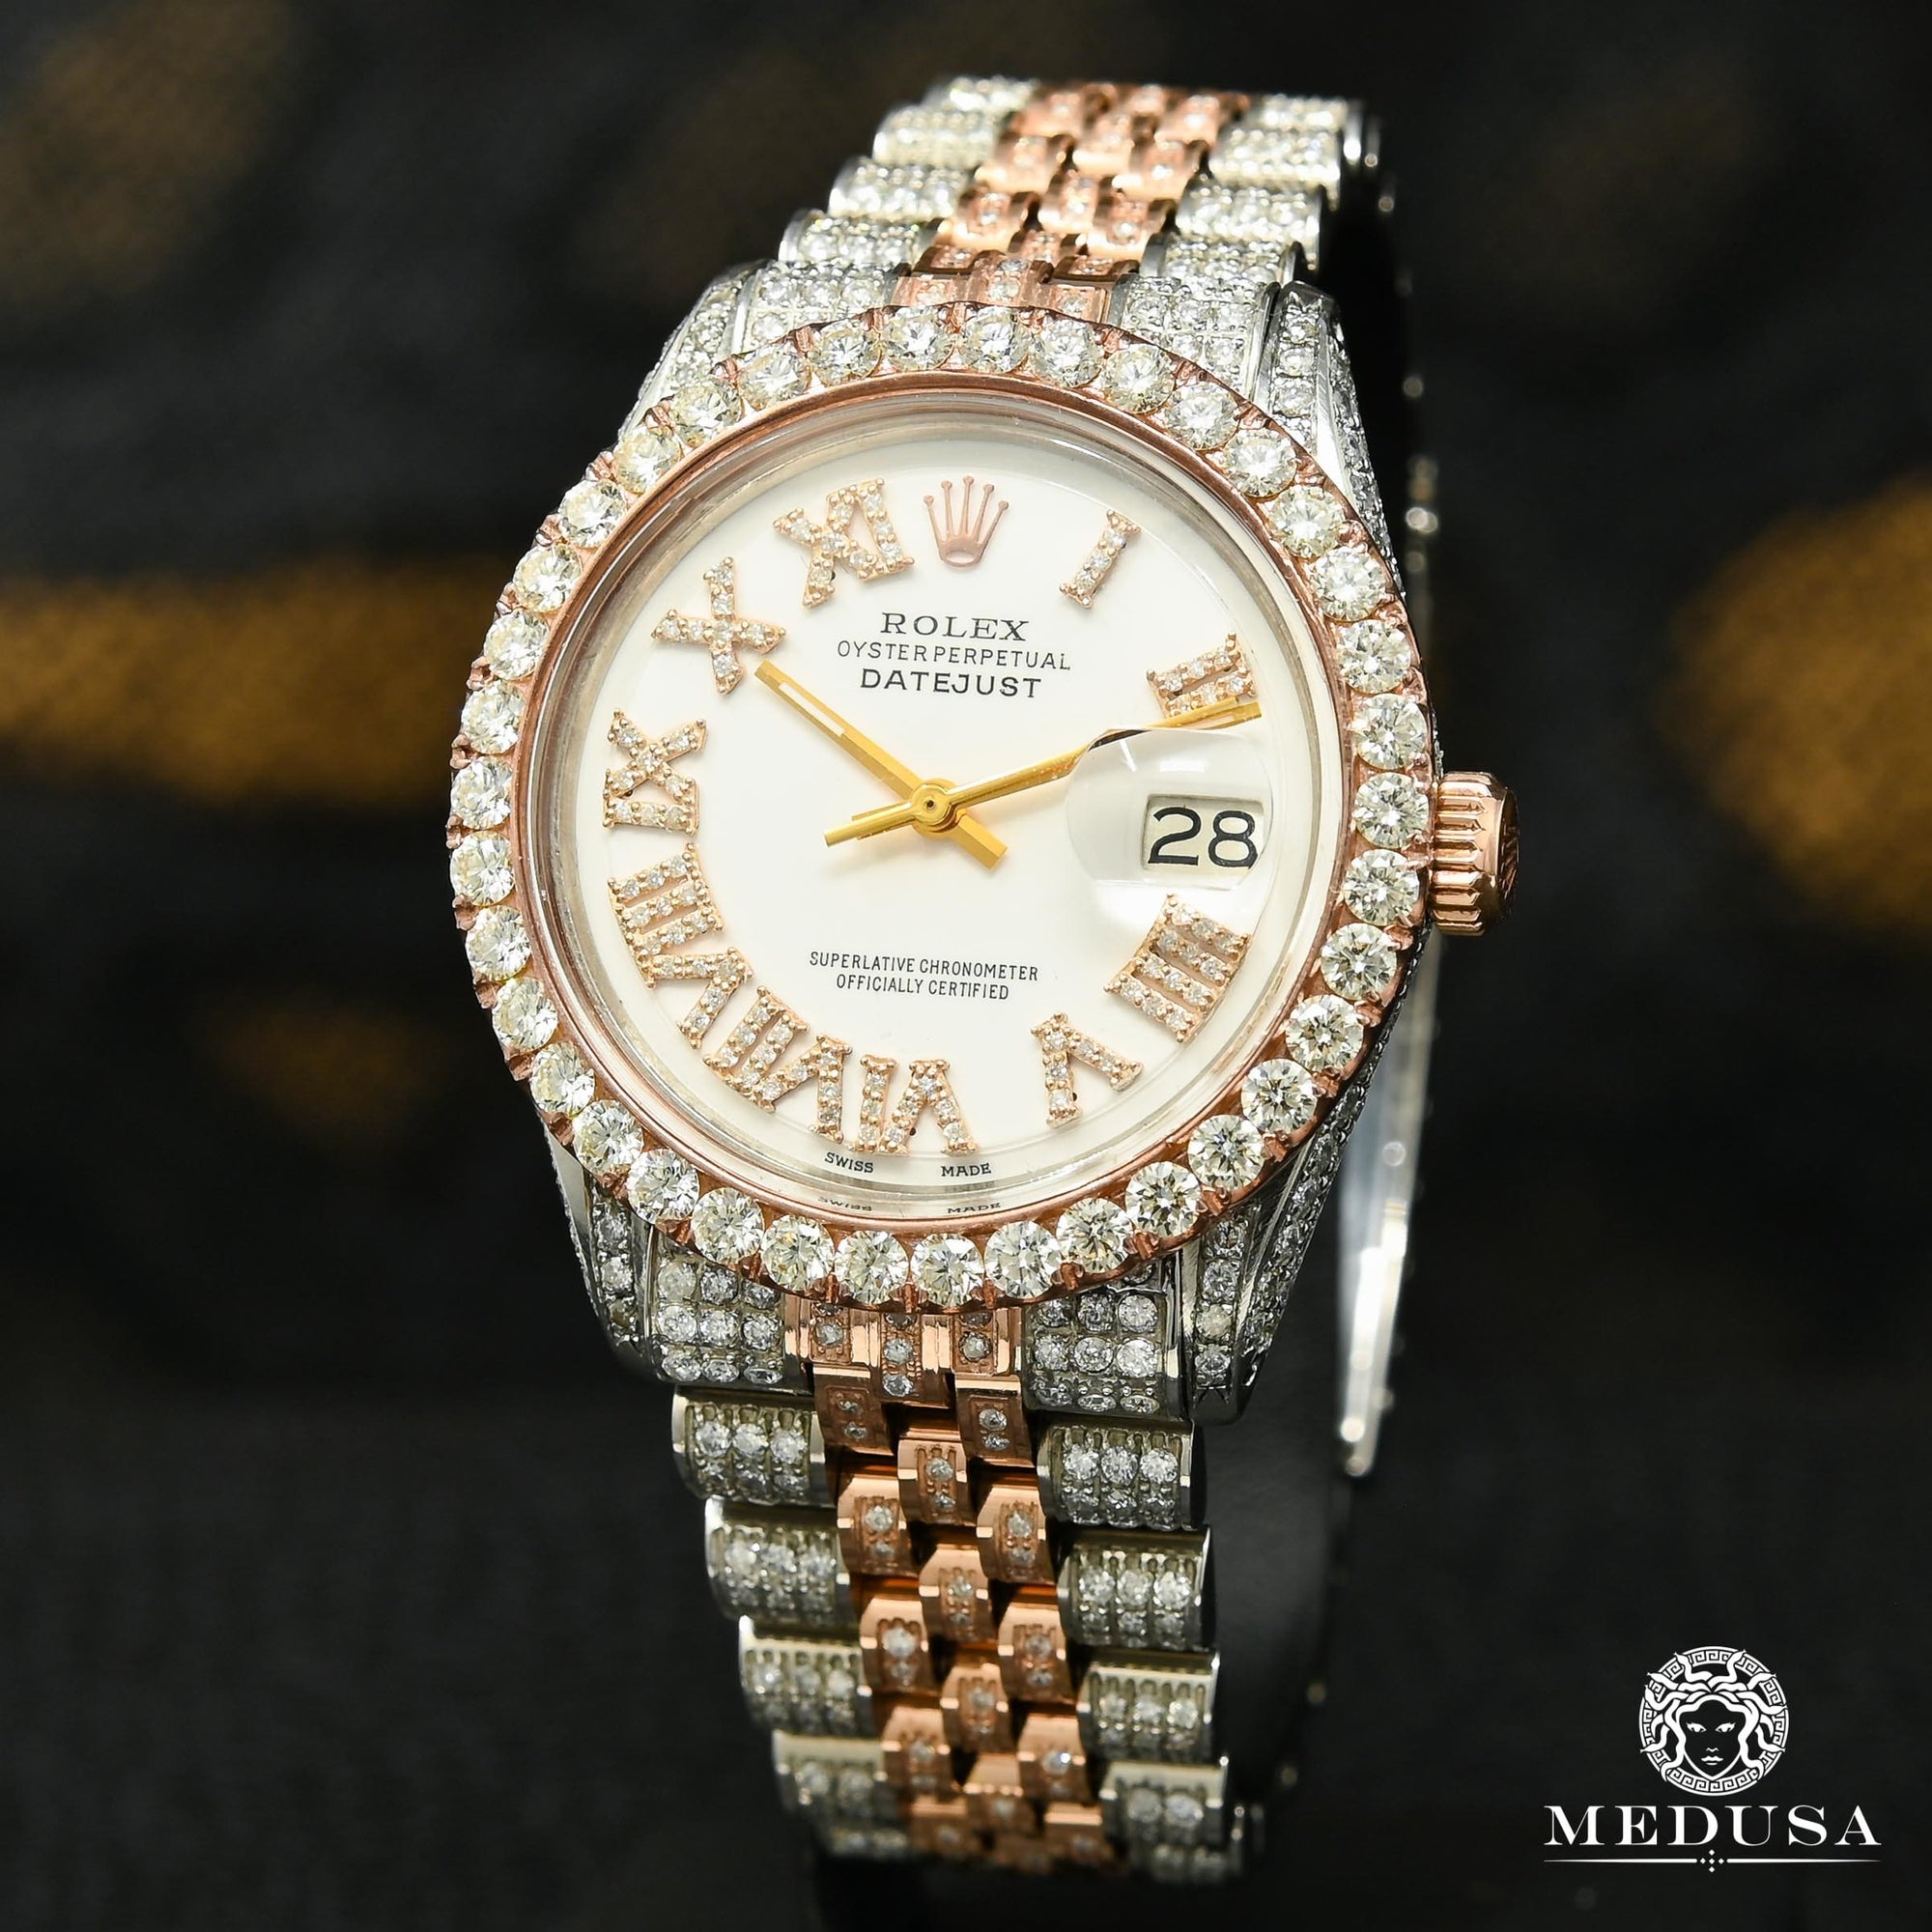 Montre Rolex | Homme Datejust 36mm - Rose 2 Tons Full Iced Or